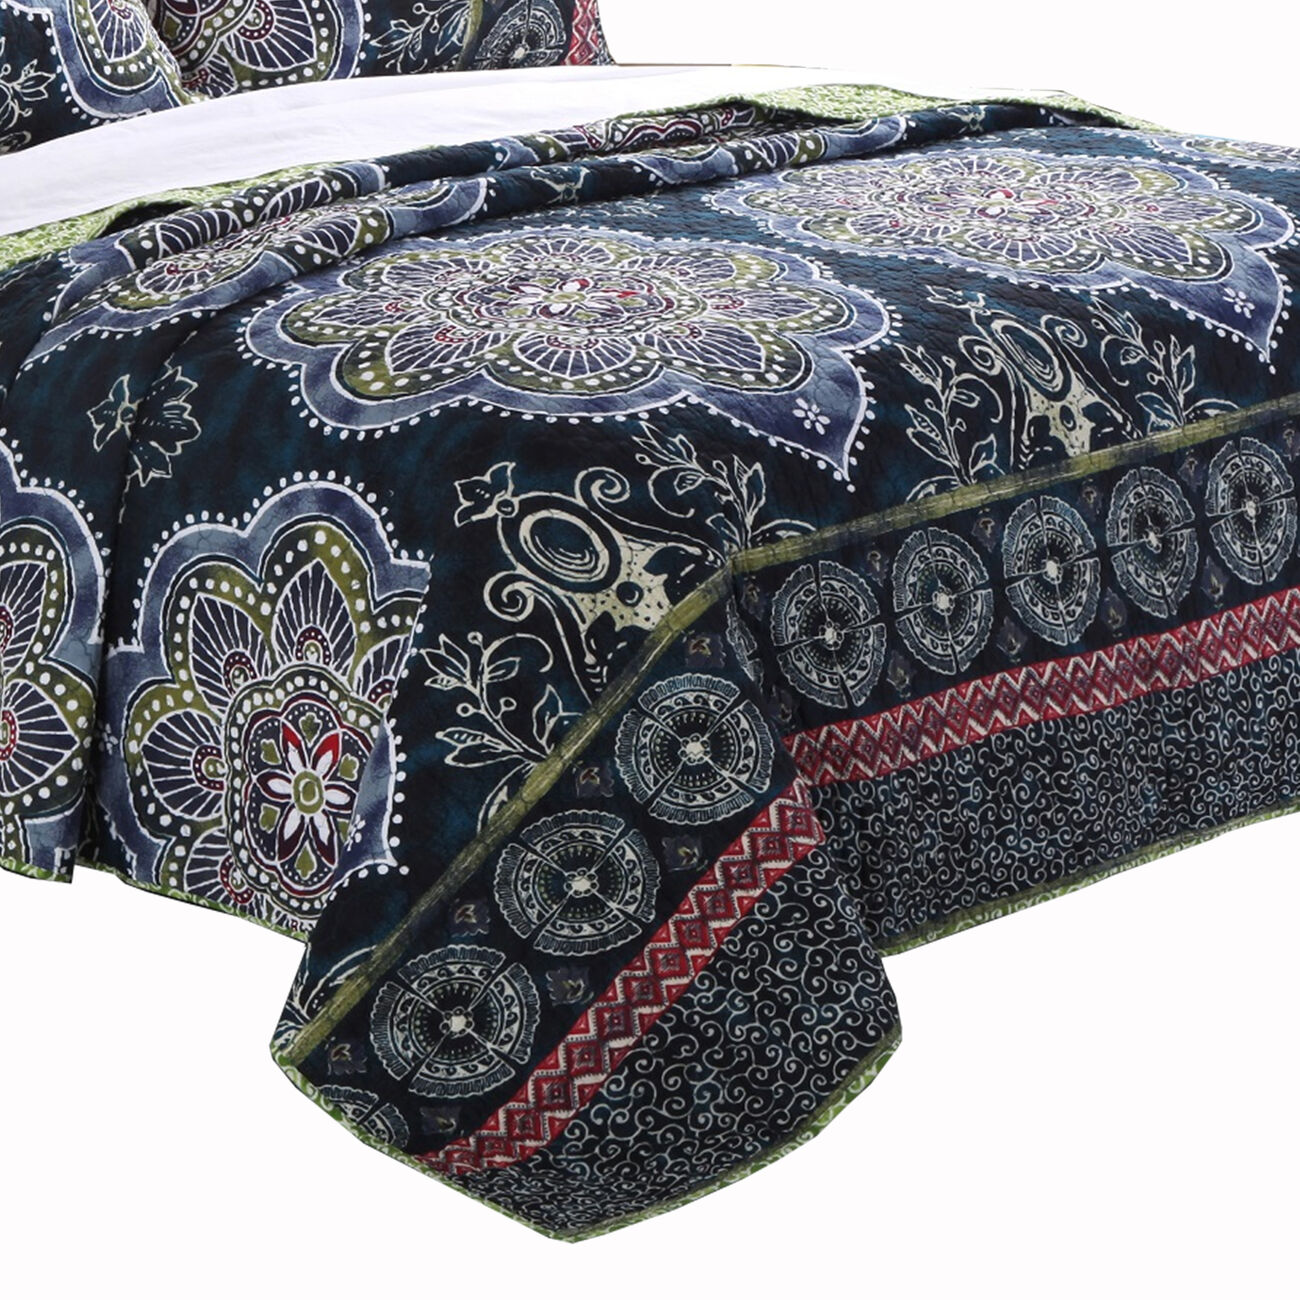 3 Piece King Size Quilt Set with Medallion Print, Dark Blue and Green